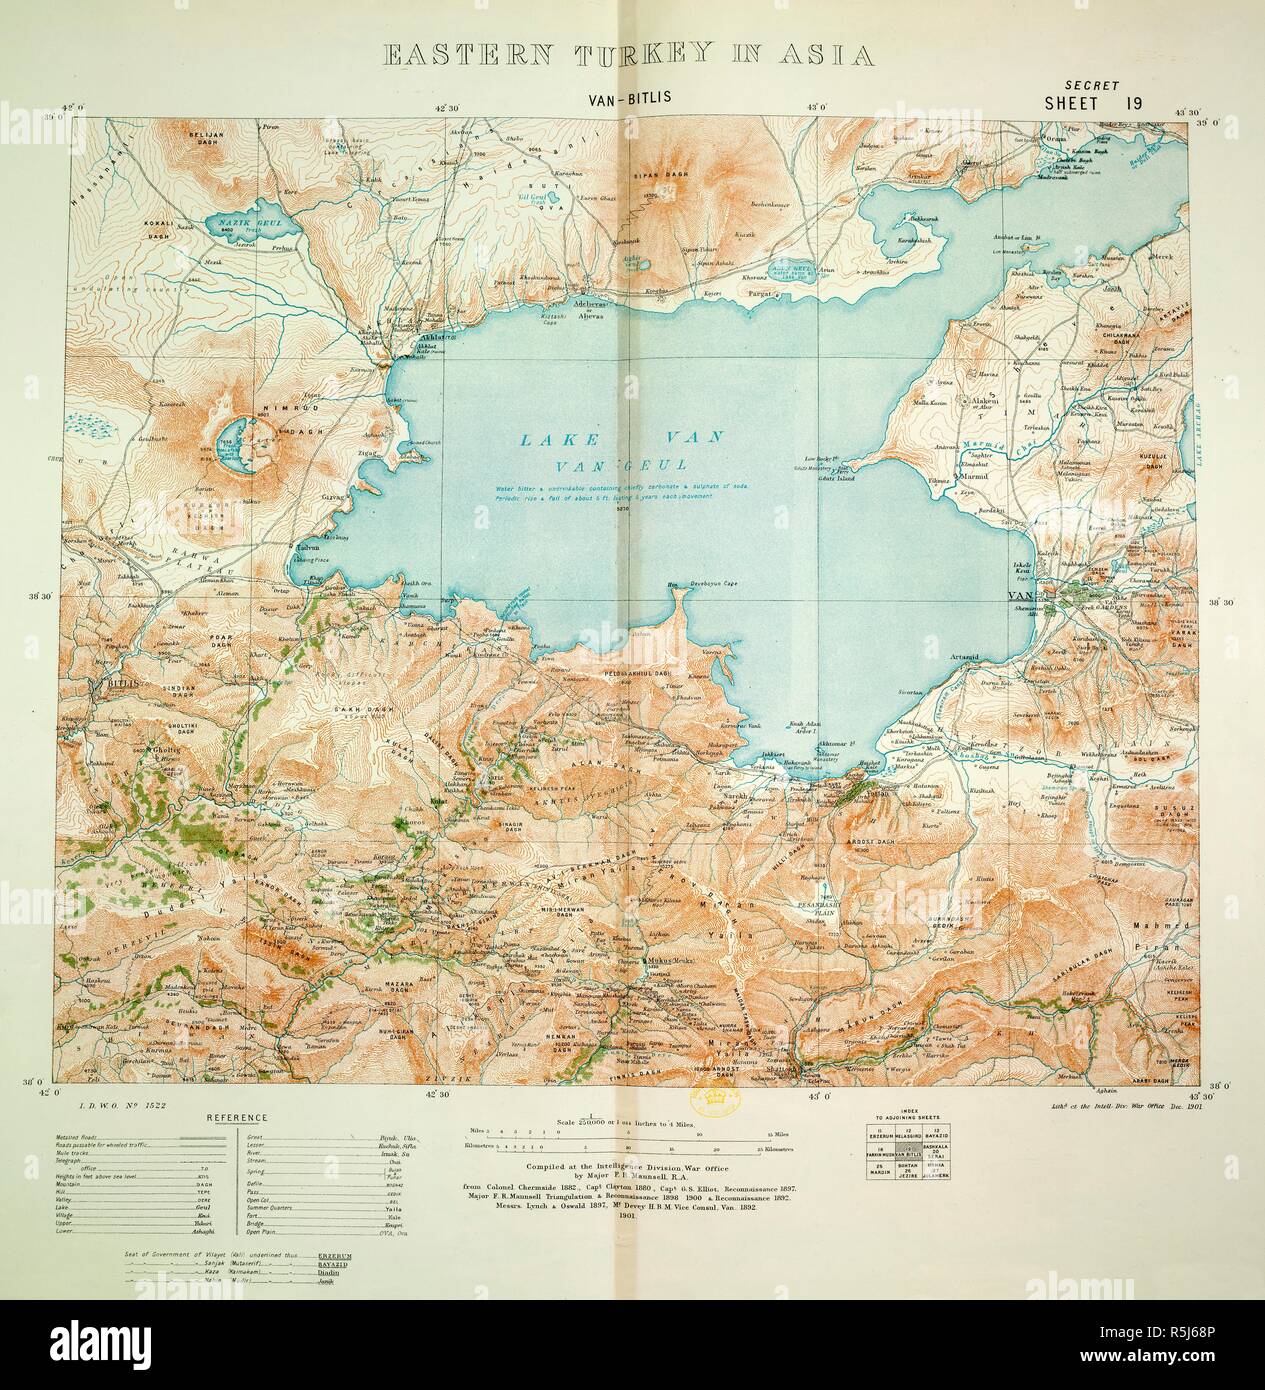 Van Bitlis. Eastern Turkey in Asia. Scale, 1 : 250,000, or 1.0. London : Geographical Section, General Staff, 1901. Source: Maps.152.d.2, sheet 19. Stock Photo